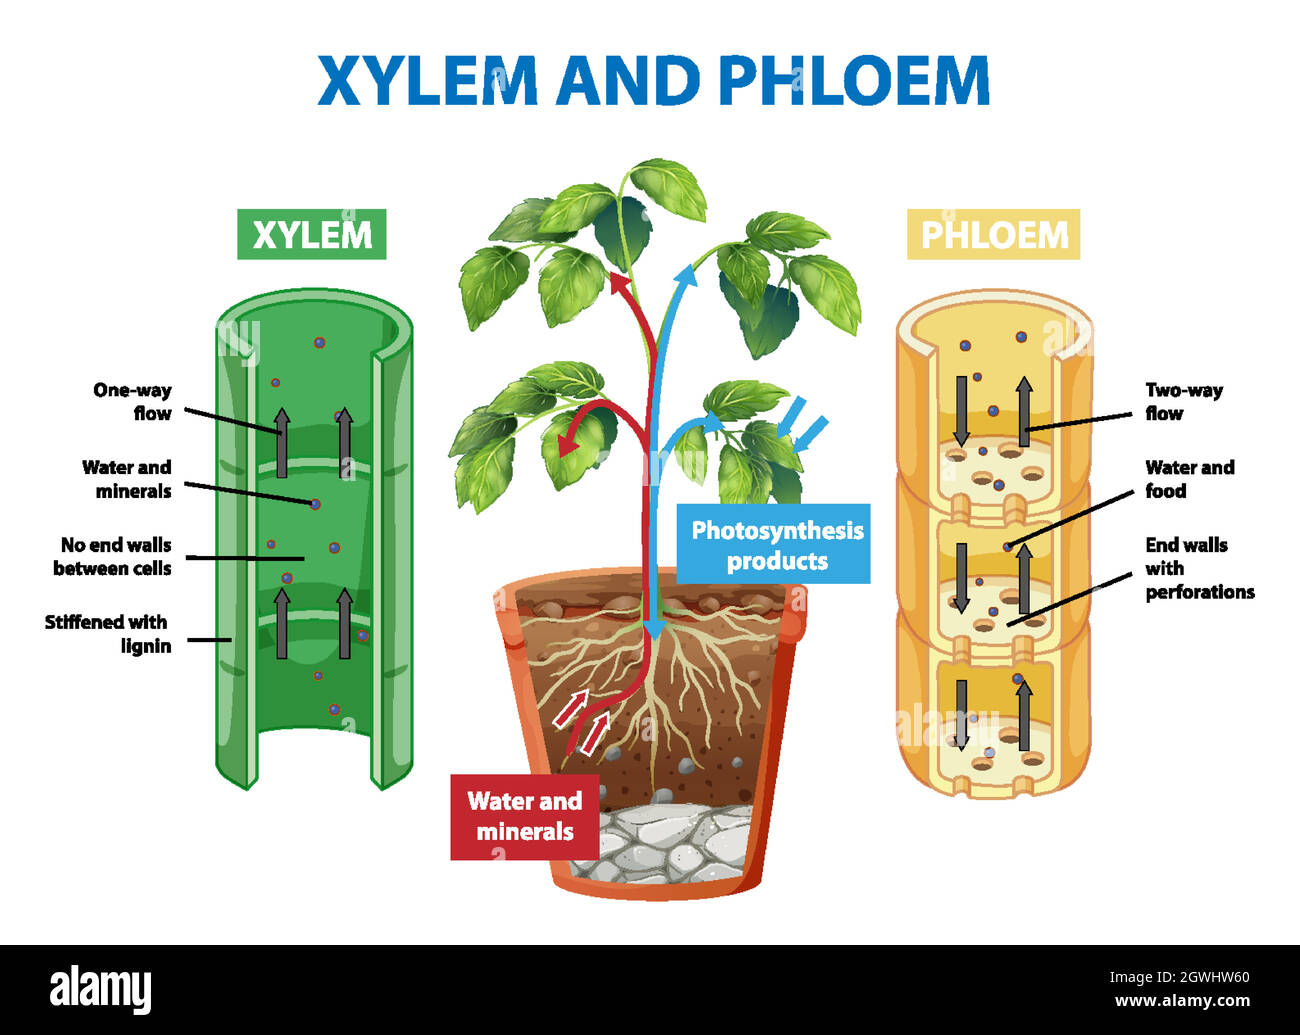 Diagram showing xylem and phloem of plant Stock Vector